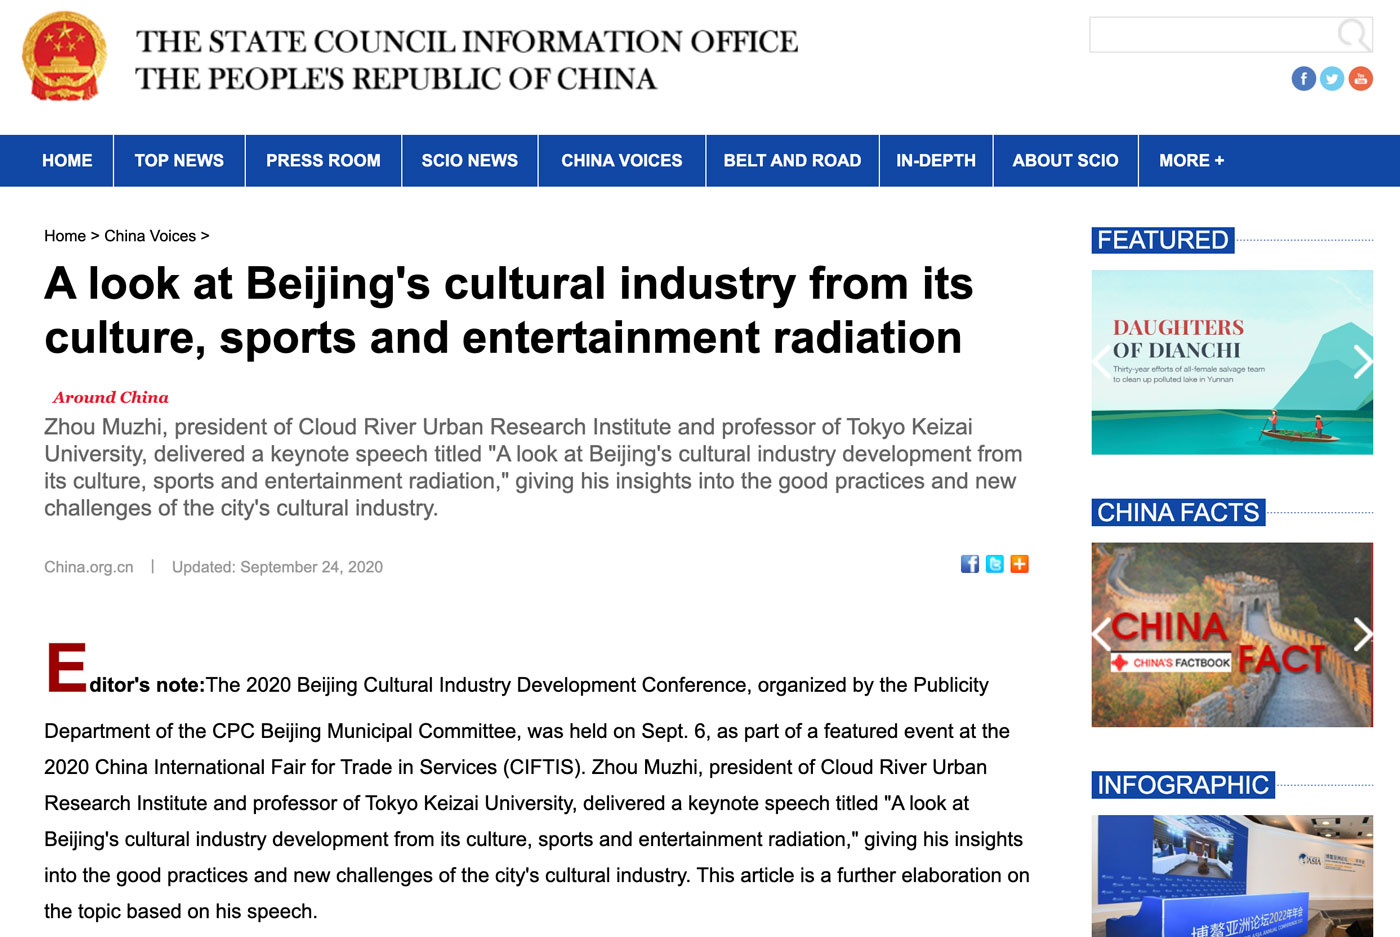 A look at Beijing’s cultural industry from its culture, sports and entertainment radiation